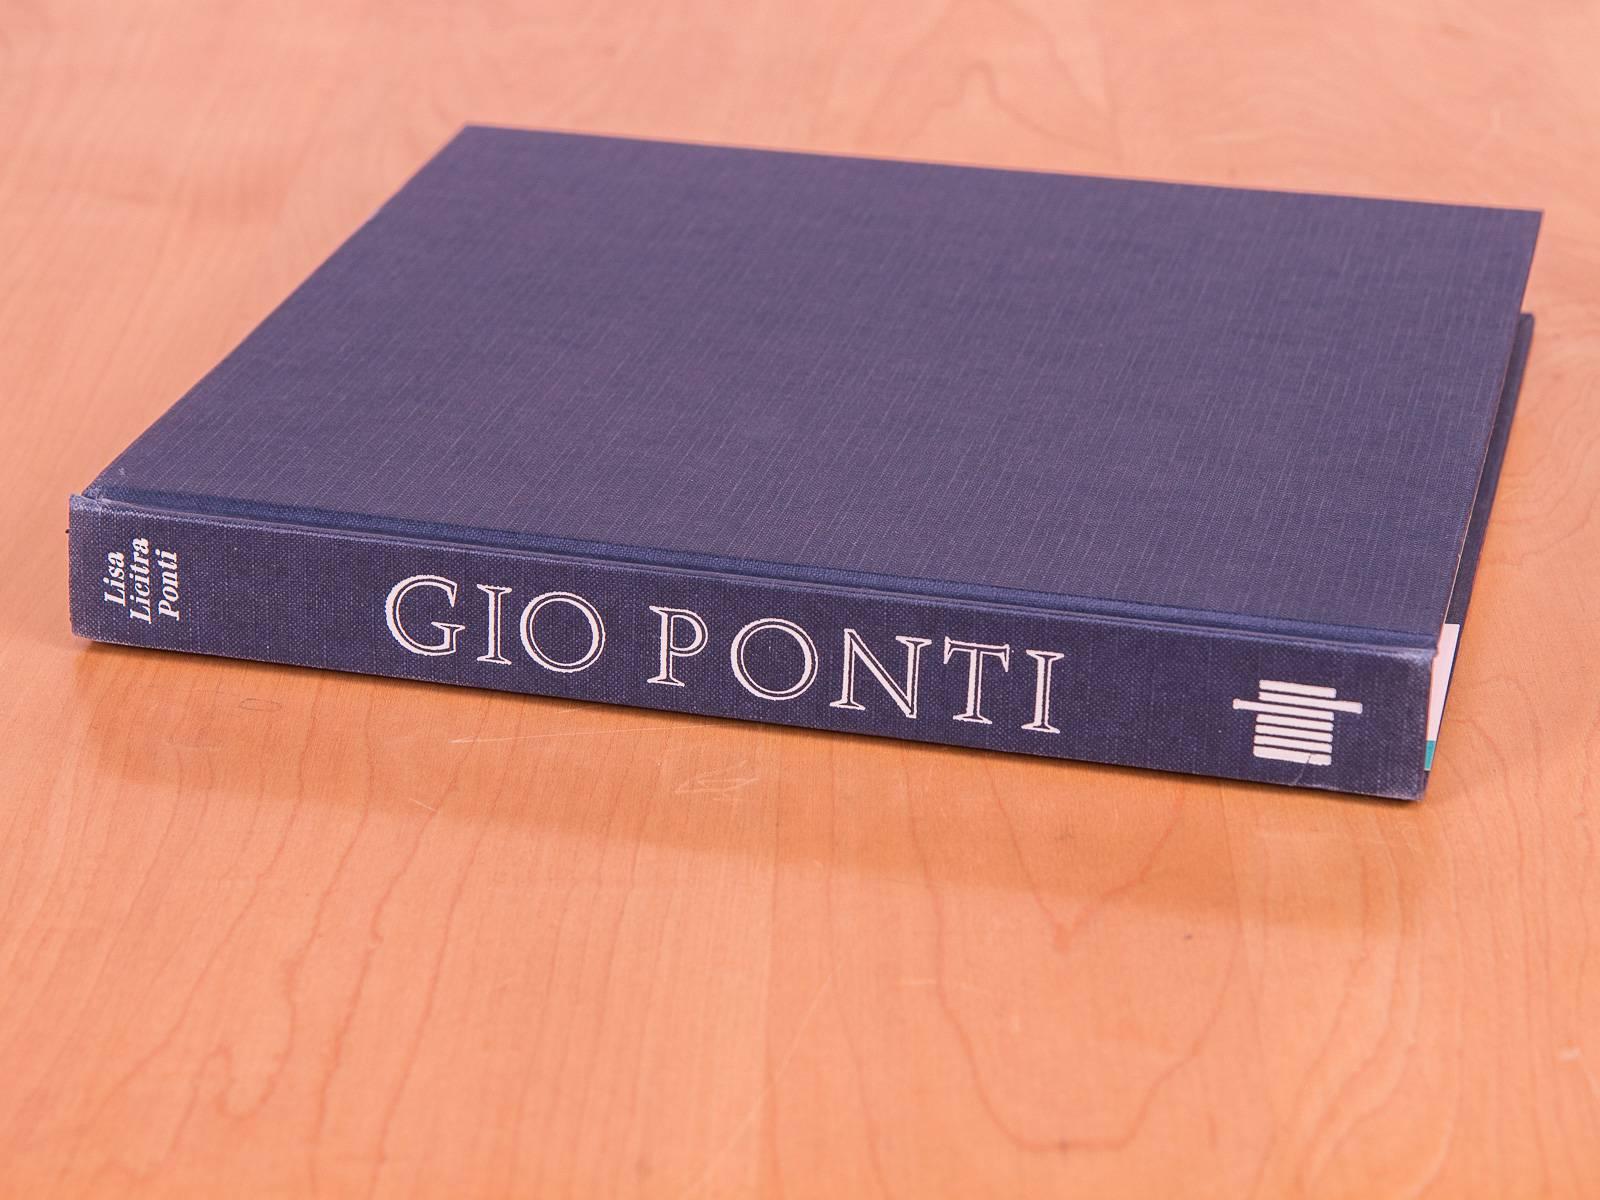 Rare, out-of-print catalogue raisonne of Italian architect, designer, publisher, and artist, Gio Ponti. Documents the legacy of his work from architecture publication Domus to the design of the Pirelli tower built in Milan. Written by his daughter